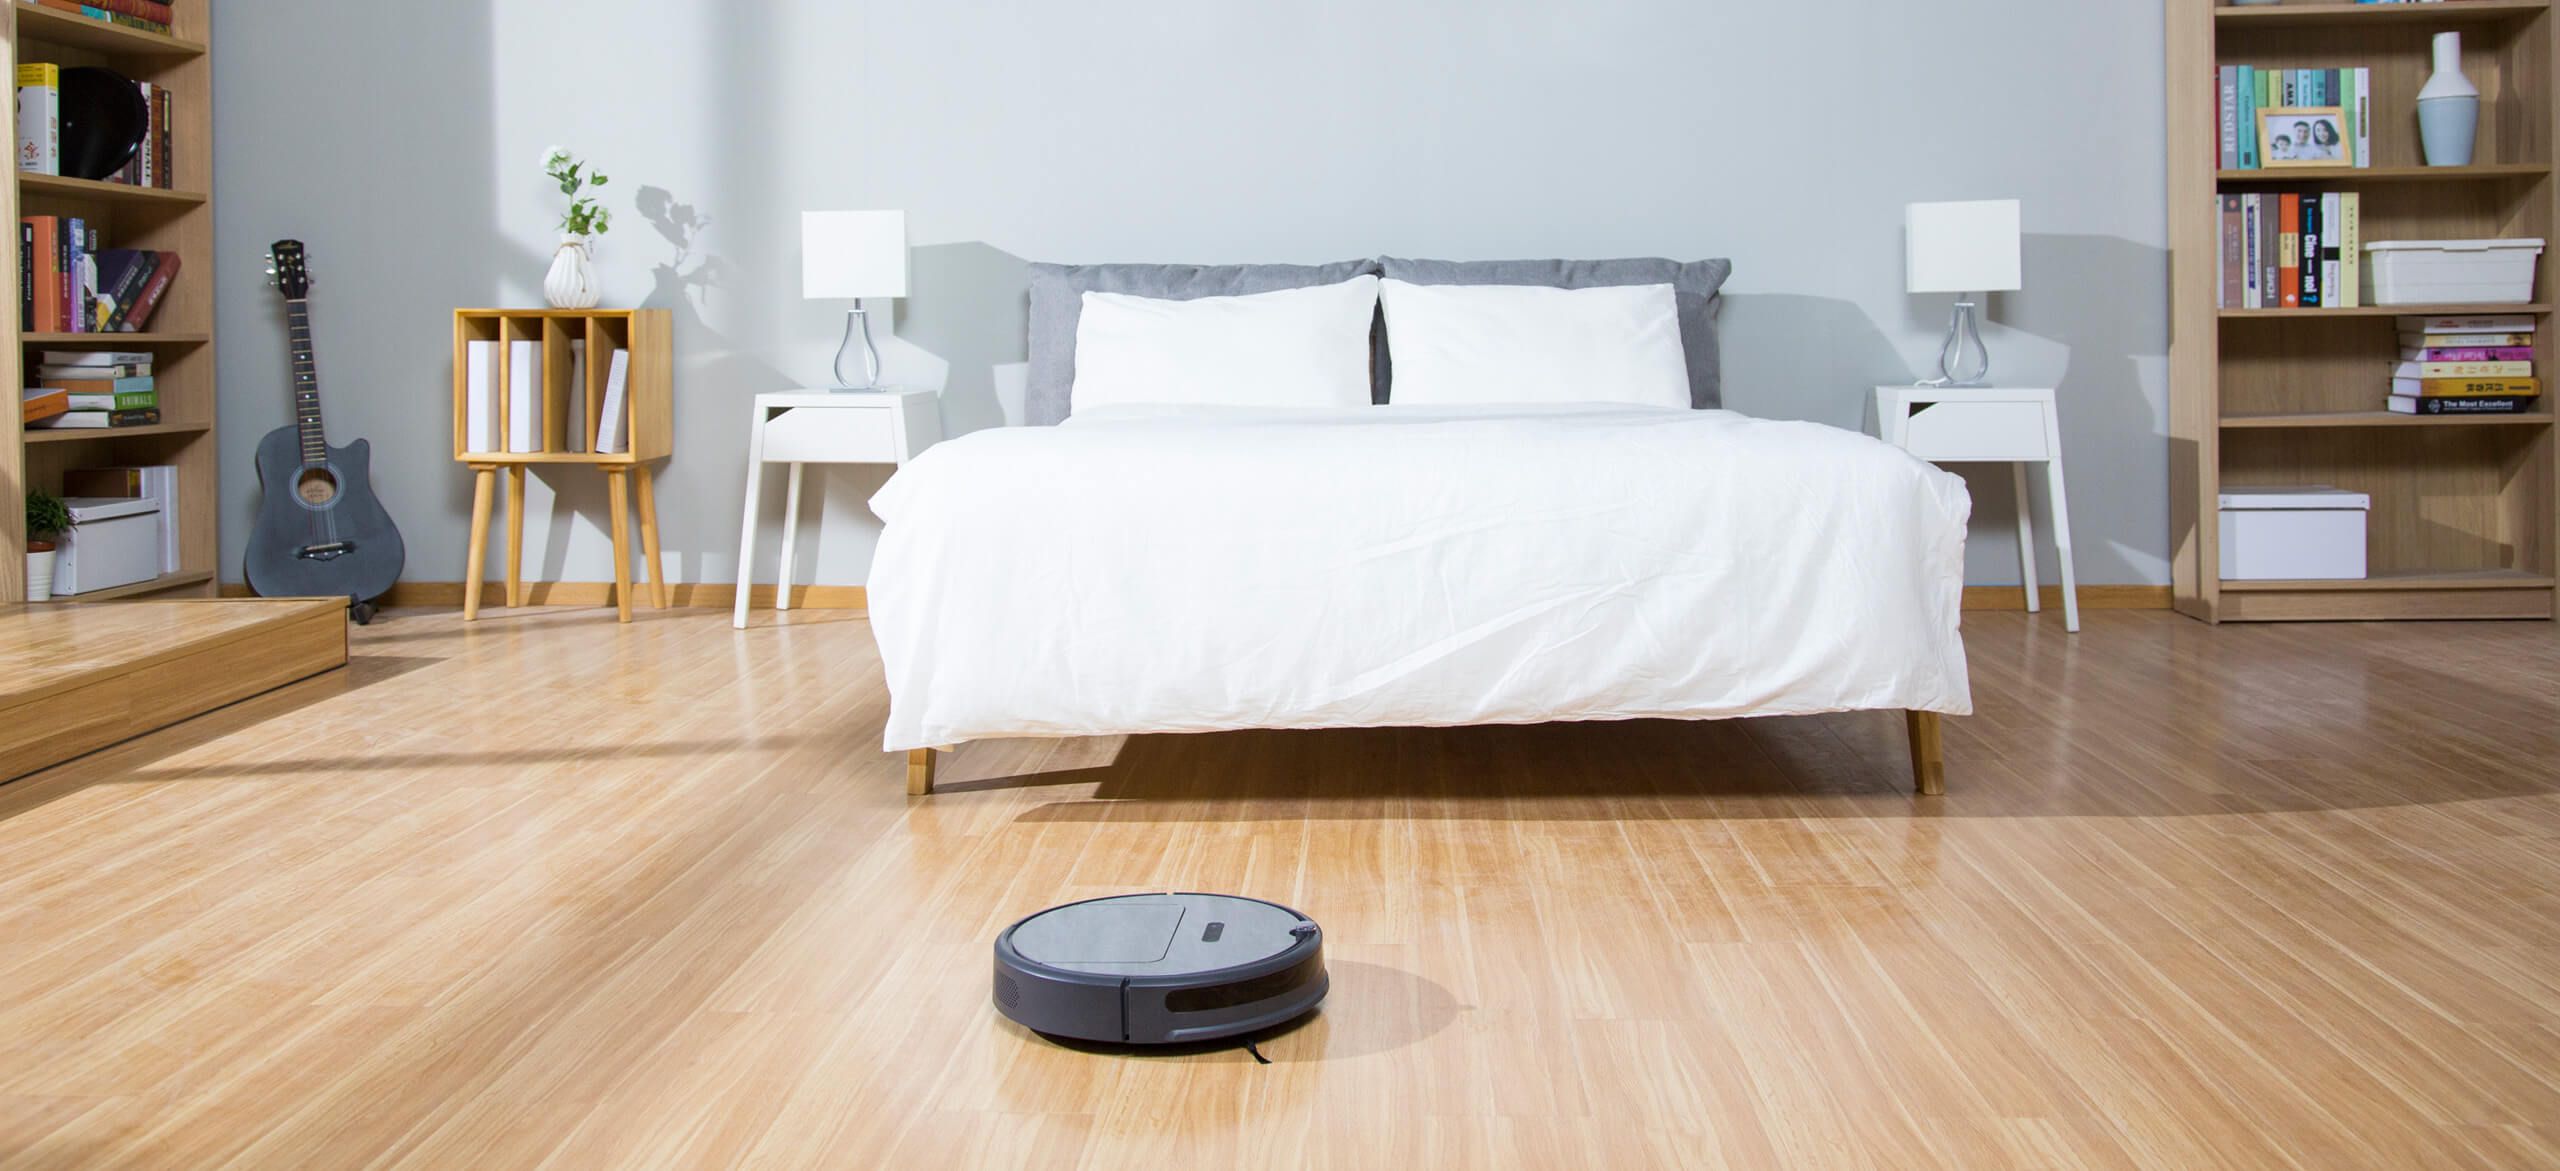 Thinking of buying a robot vacuum the Roborock E35is ideal image 1